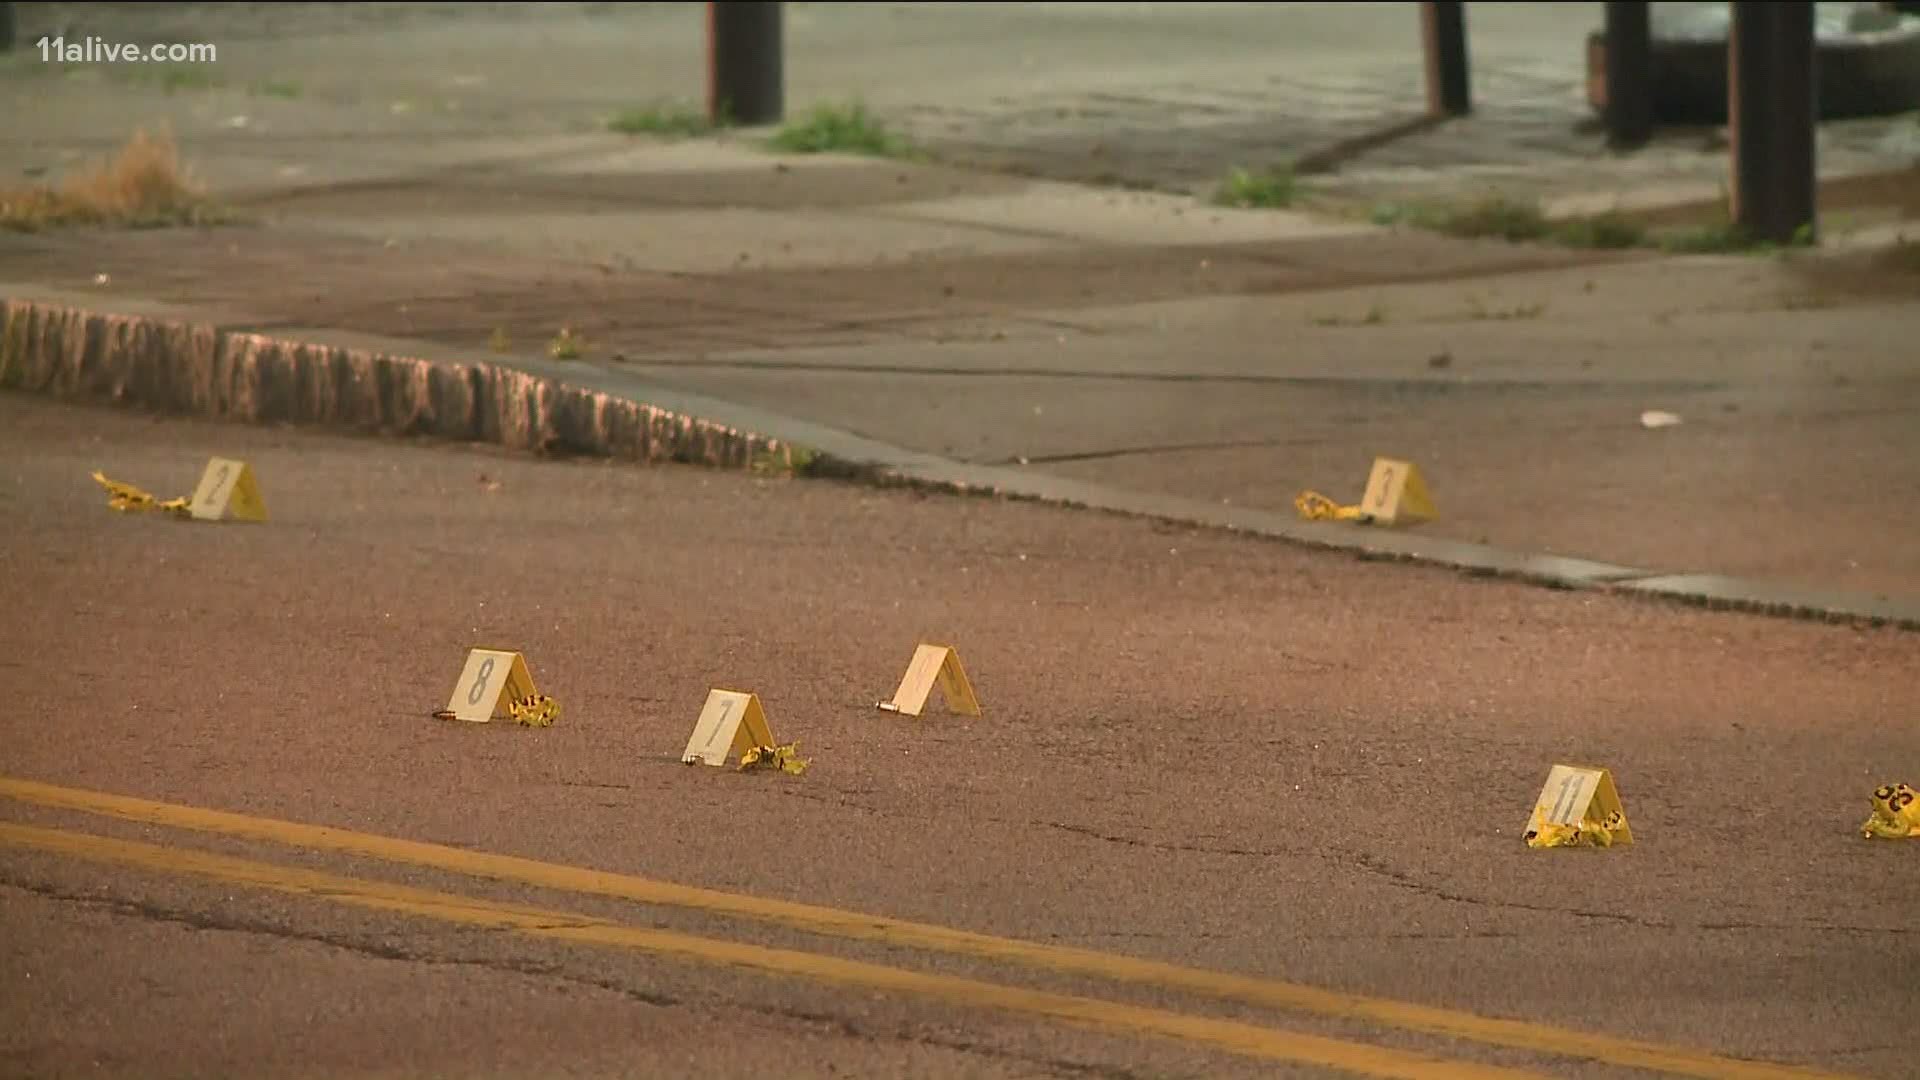 The child was hurt during a triple shooting that arose from a dispute. It happened just days after an 8-year-old girl was shot and killed in the city.